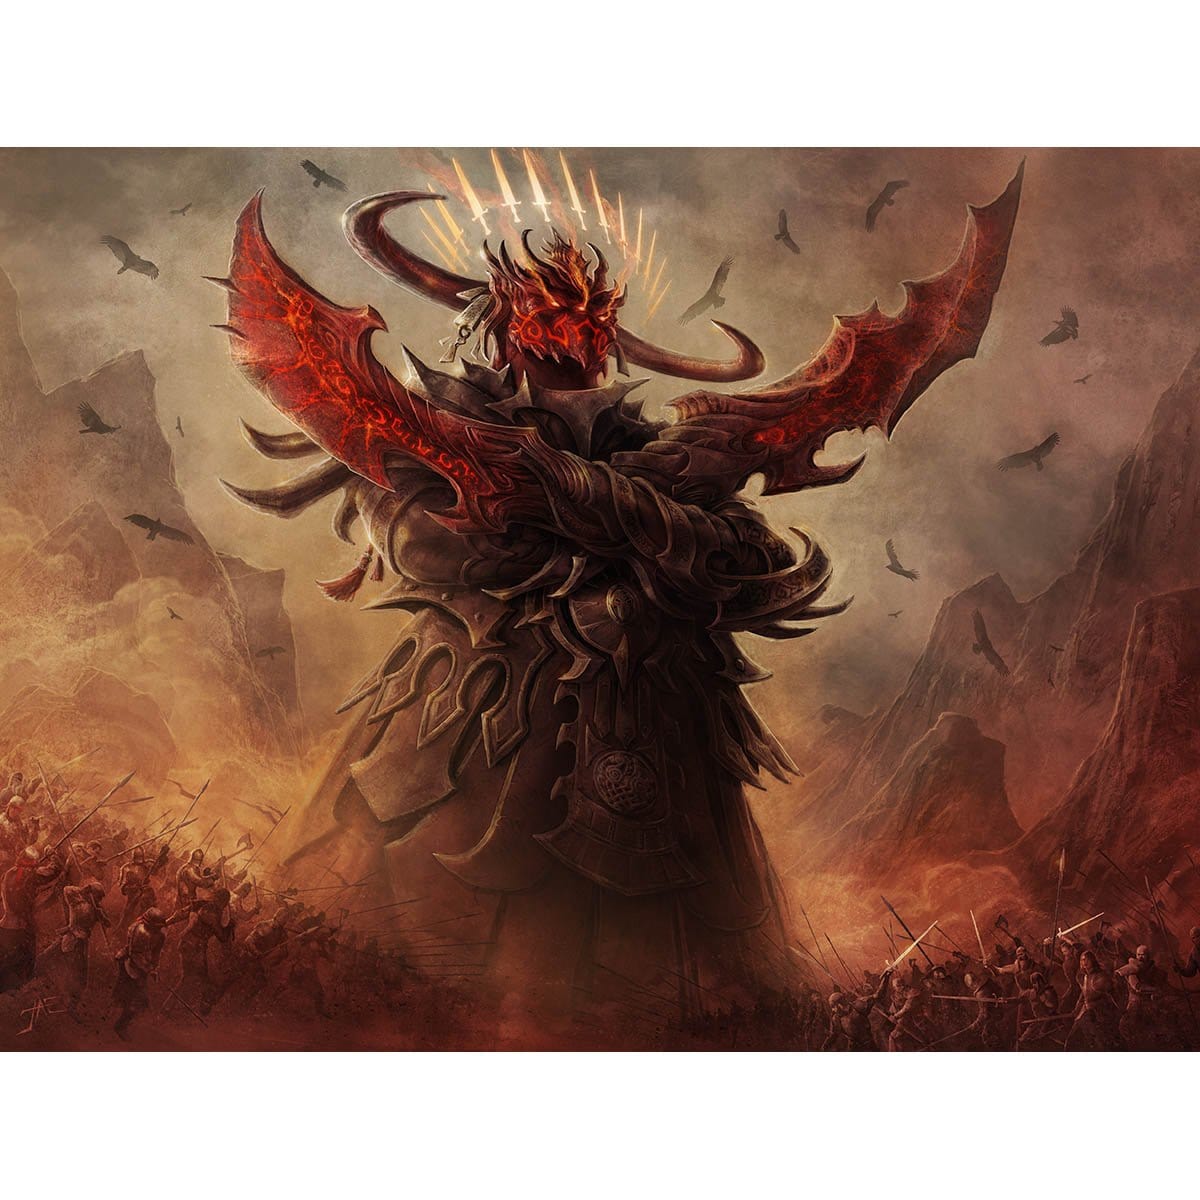 Avatar of Slaughter Print - Print - Original Magic Art - Accessories for Magic the Gathering and other card games